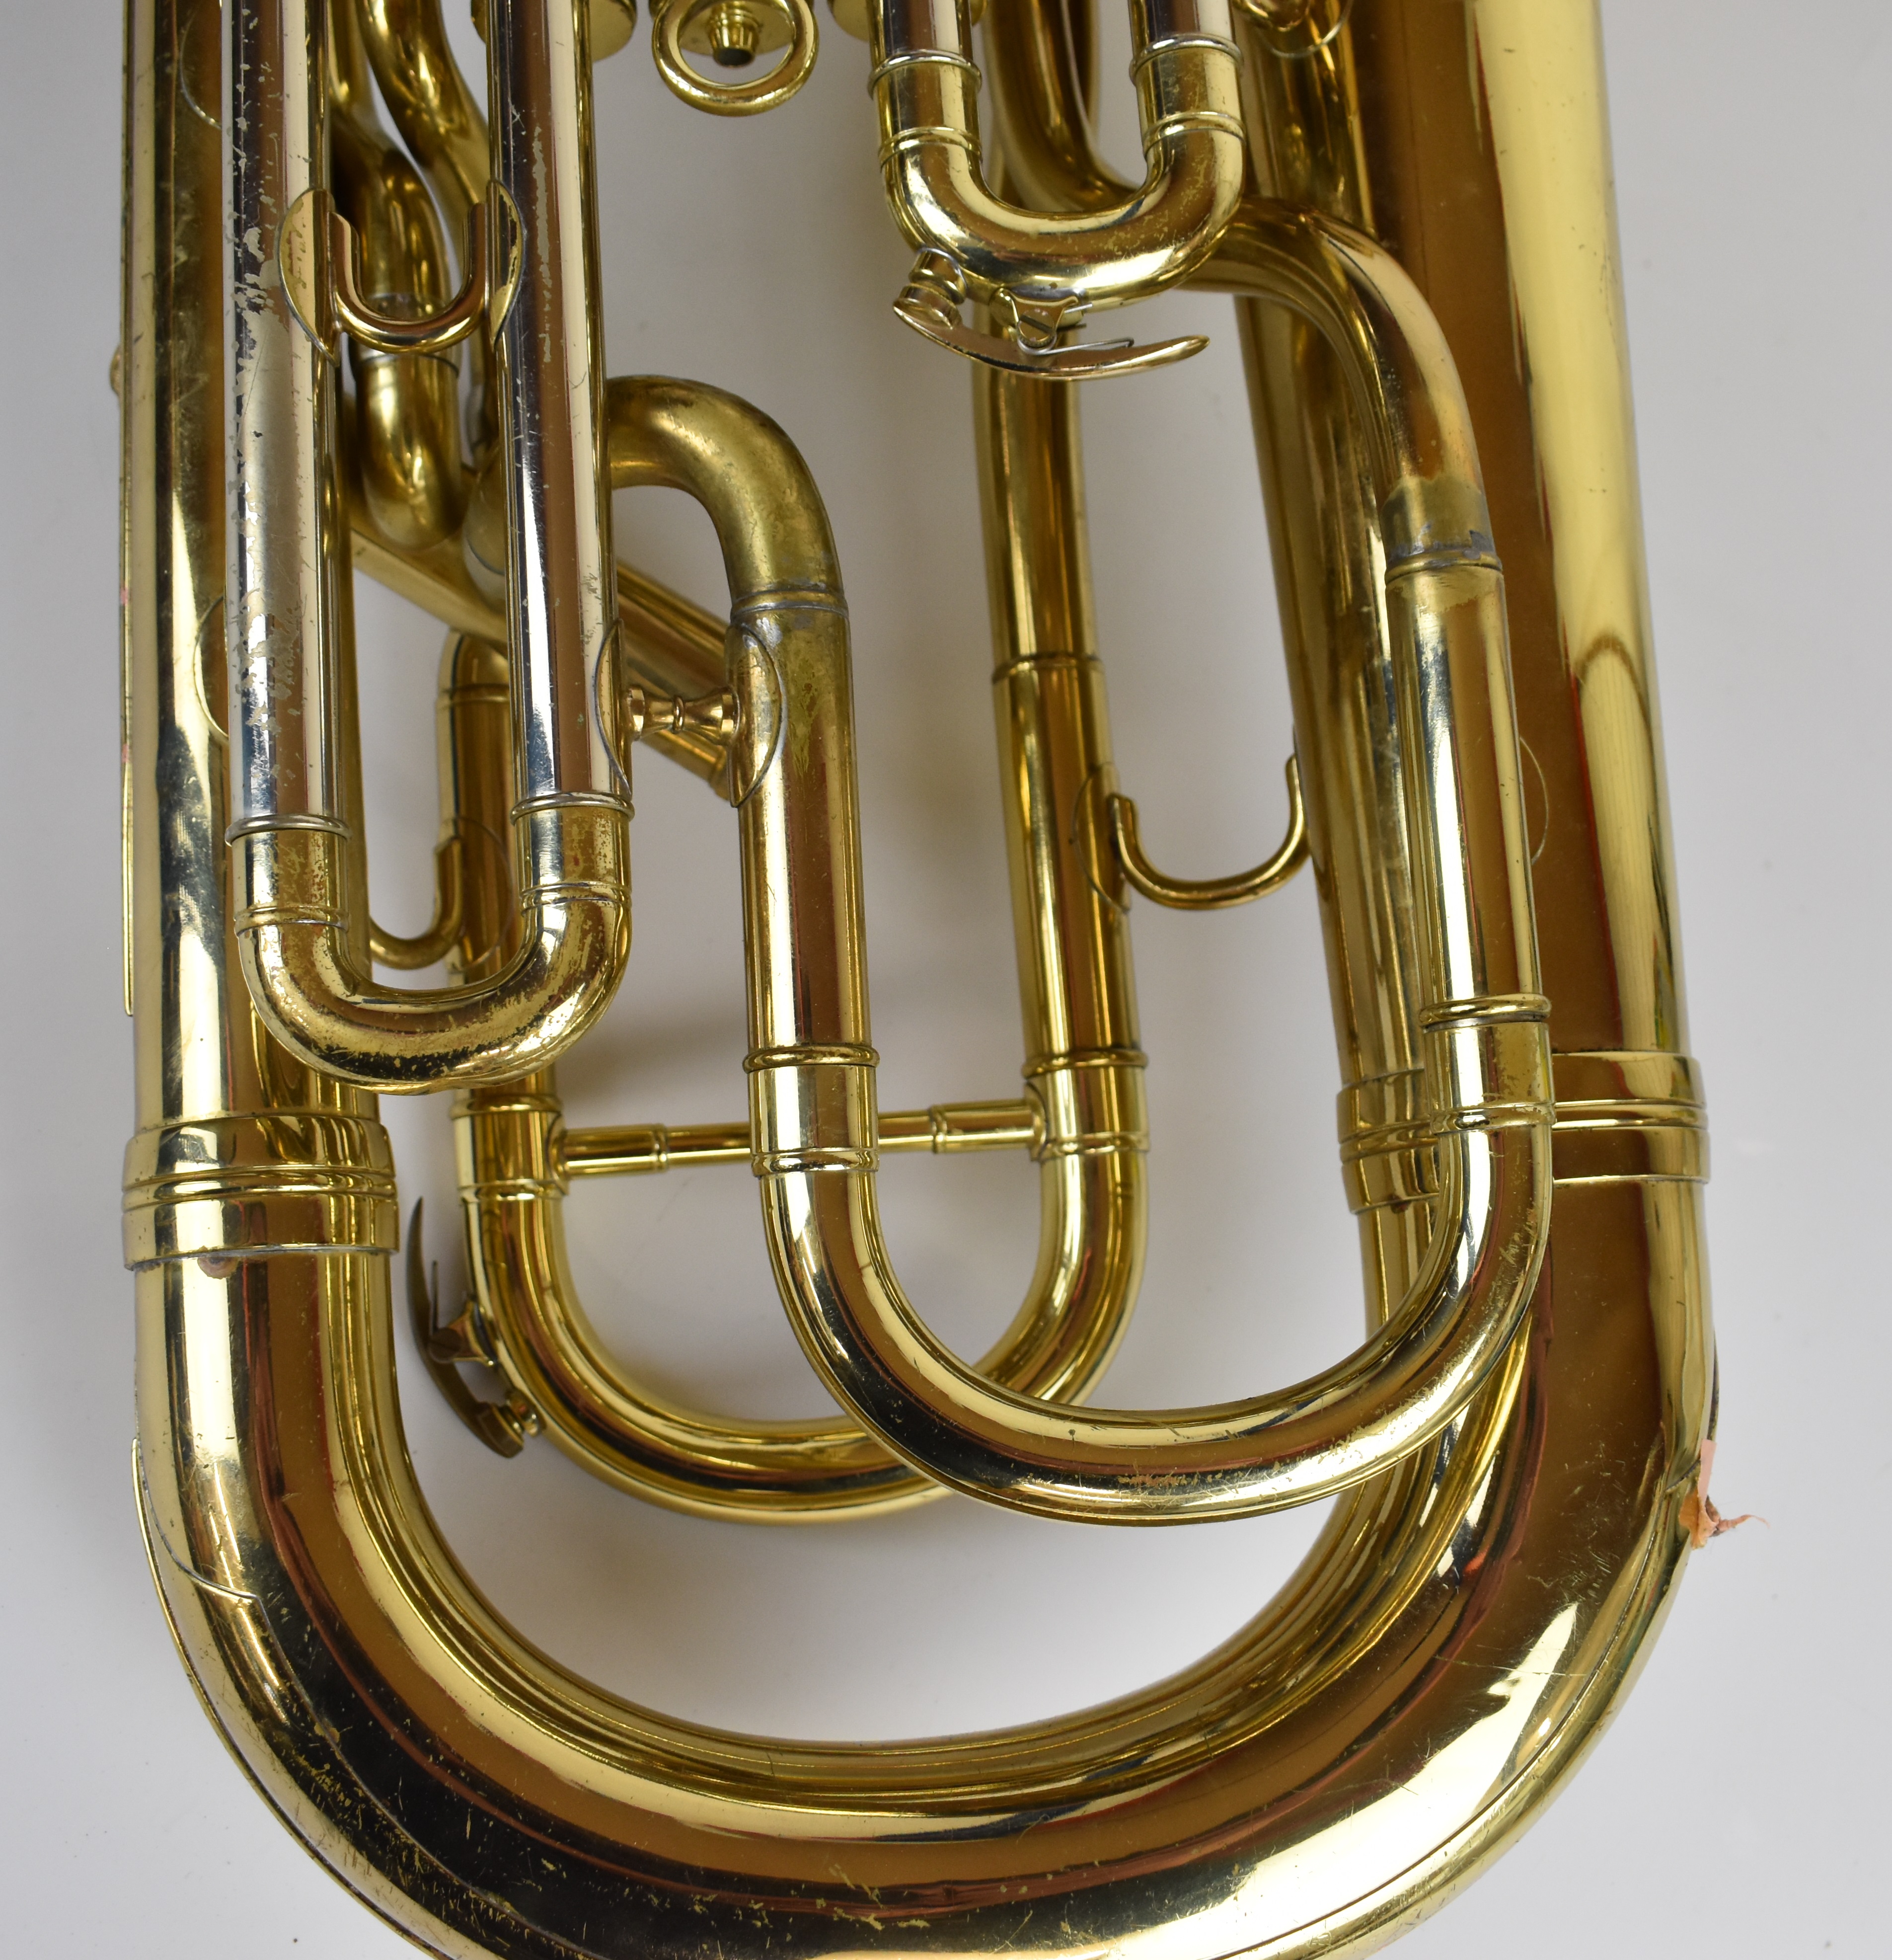 Boosey & Hawkes Besson 700 brass Euphonium, serial no. 765-718418, in fitted hard shell case with - Image 3 of 7